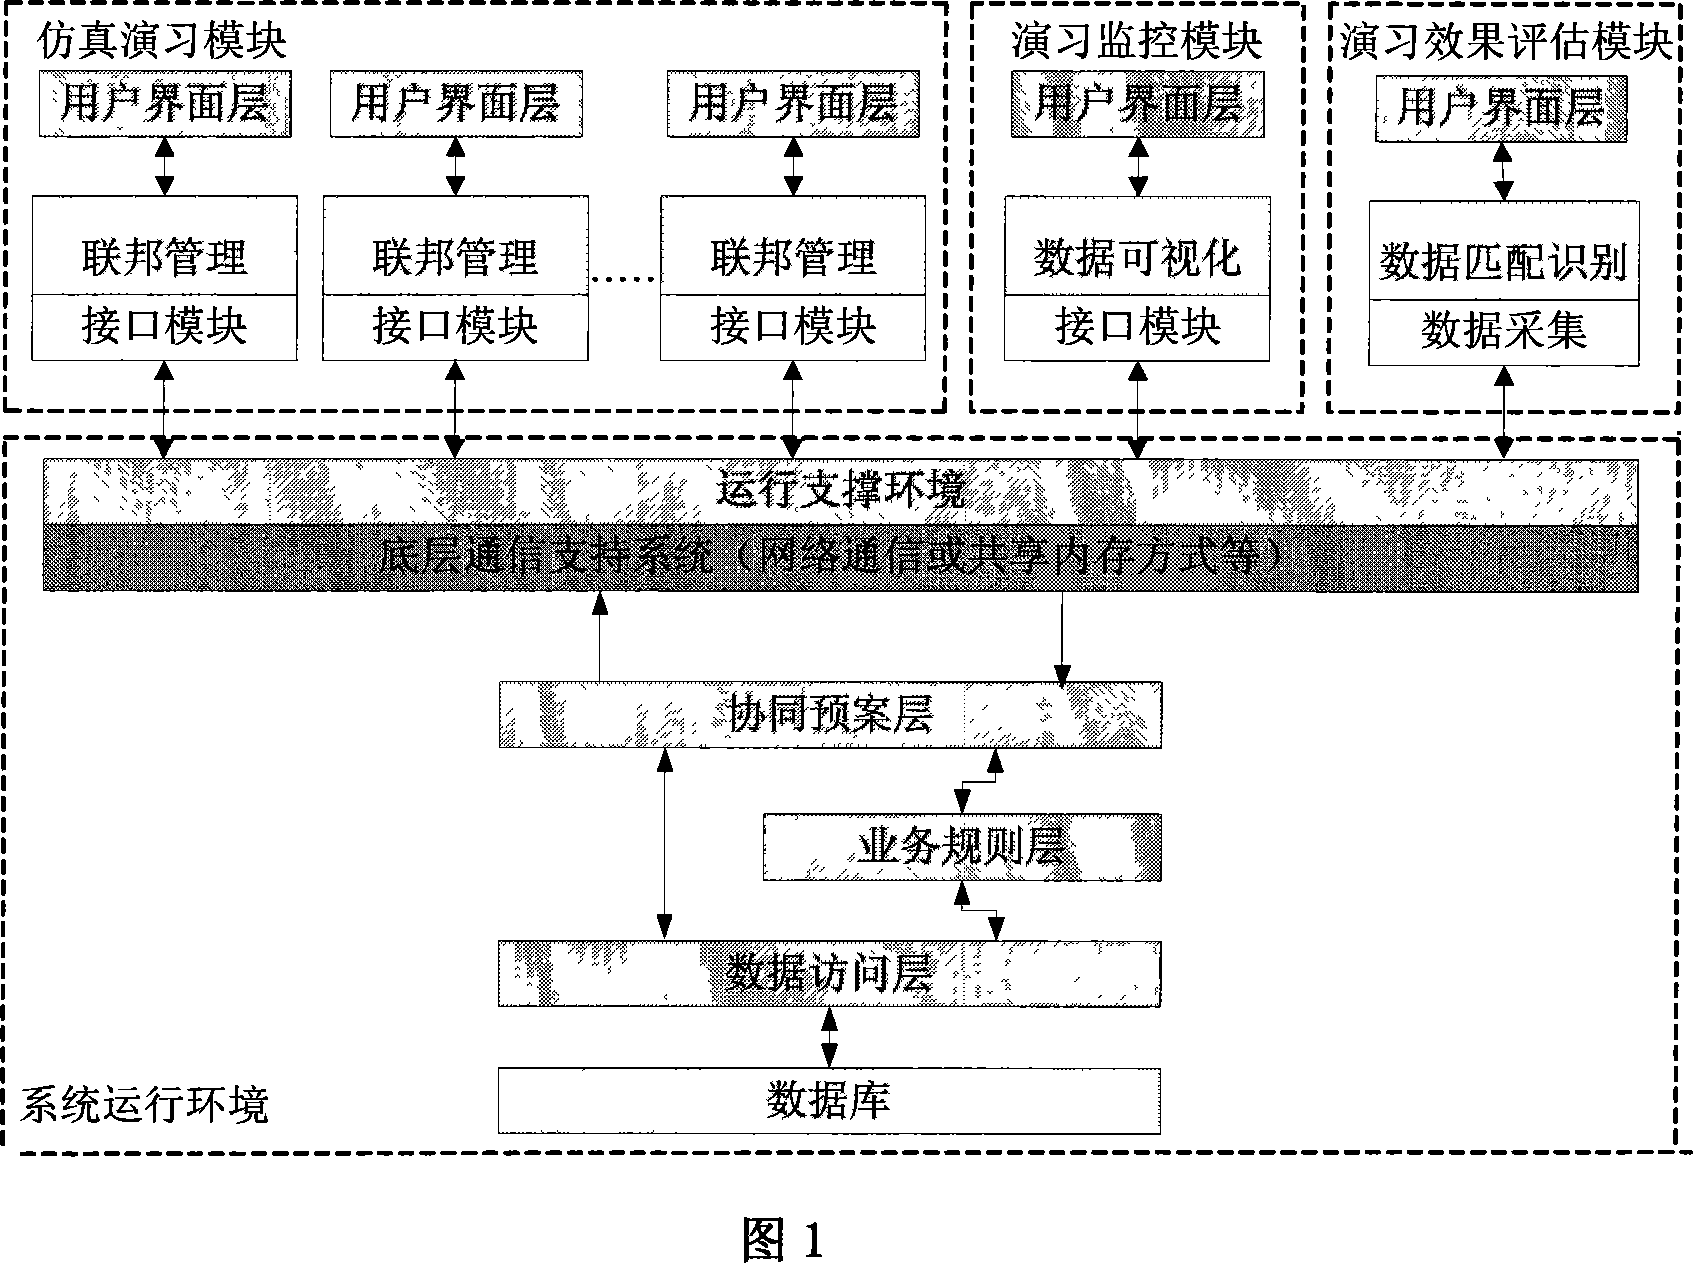 Multi-role distributed cooperat simulating system